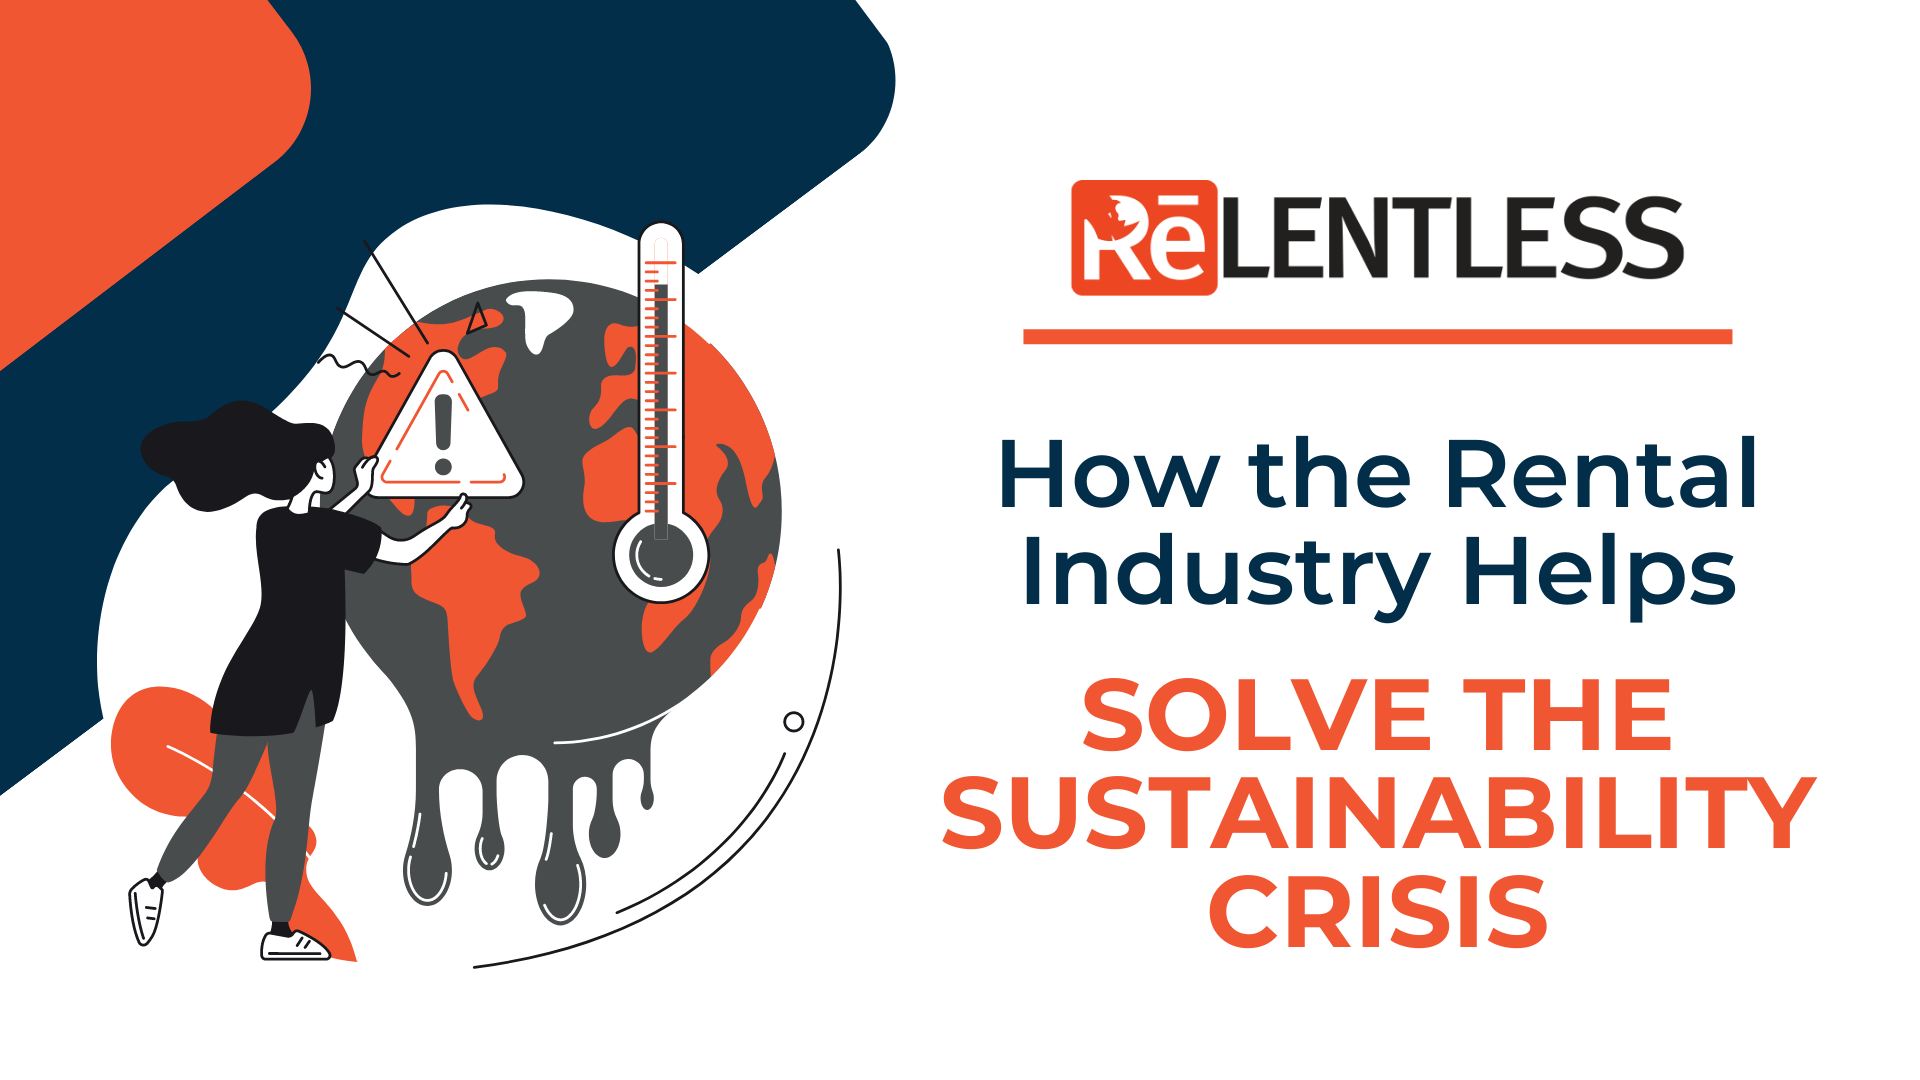 How the Rental Industry Helps Solve the Sustainability Crisis